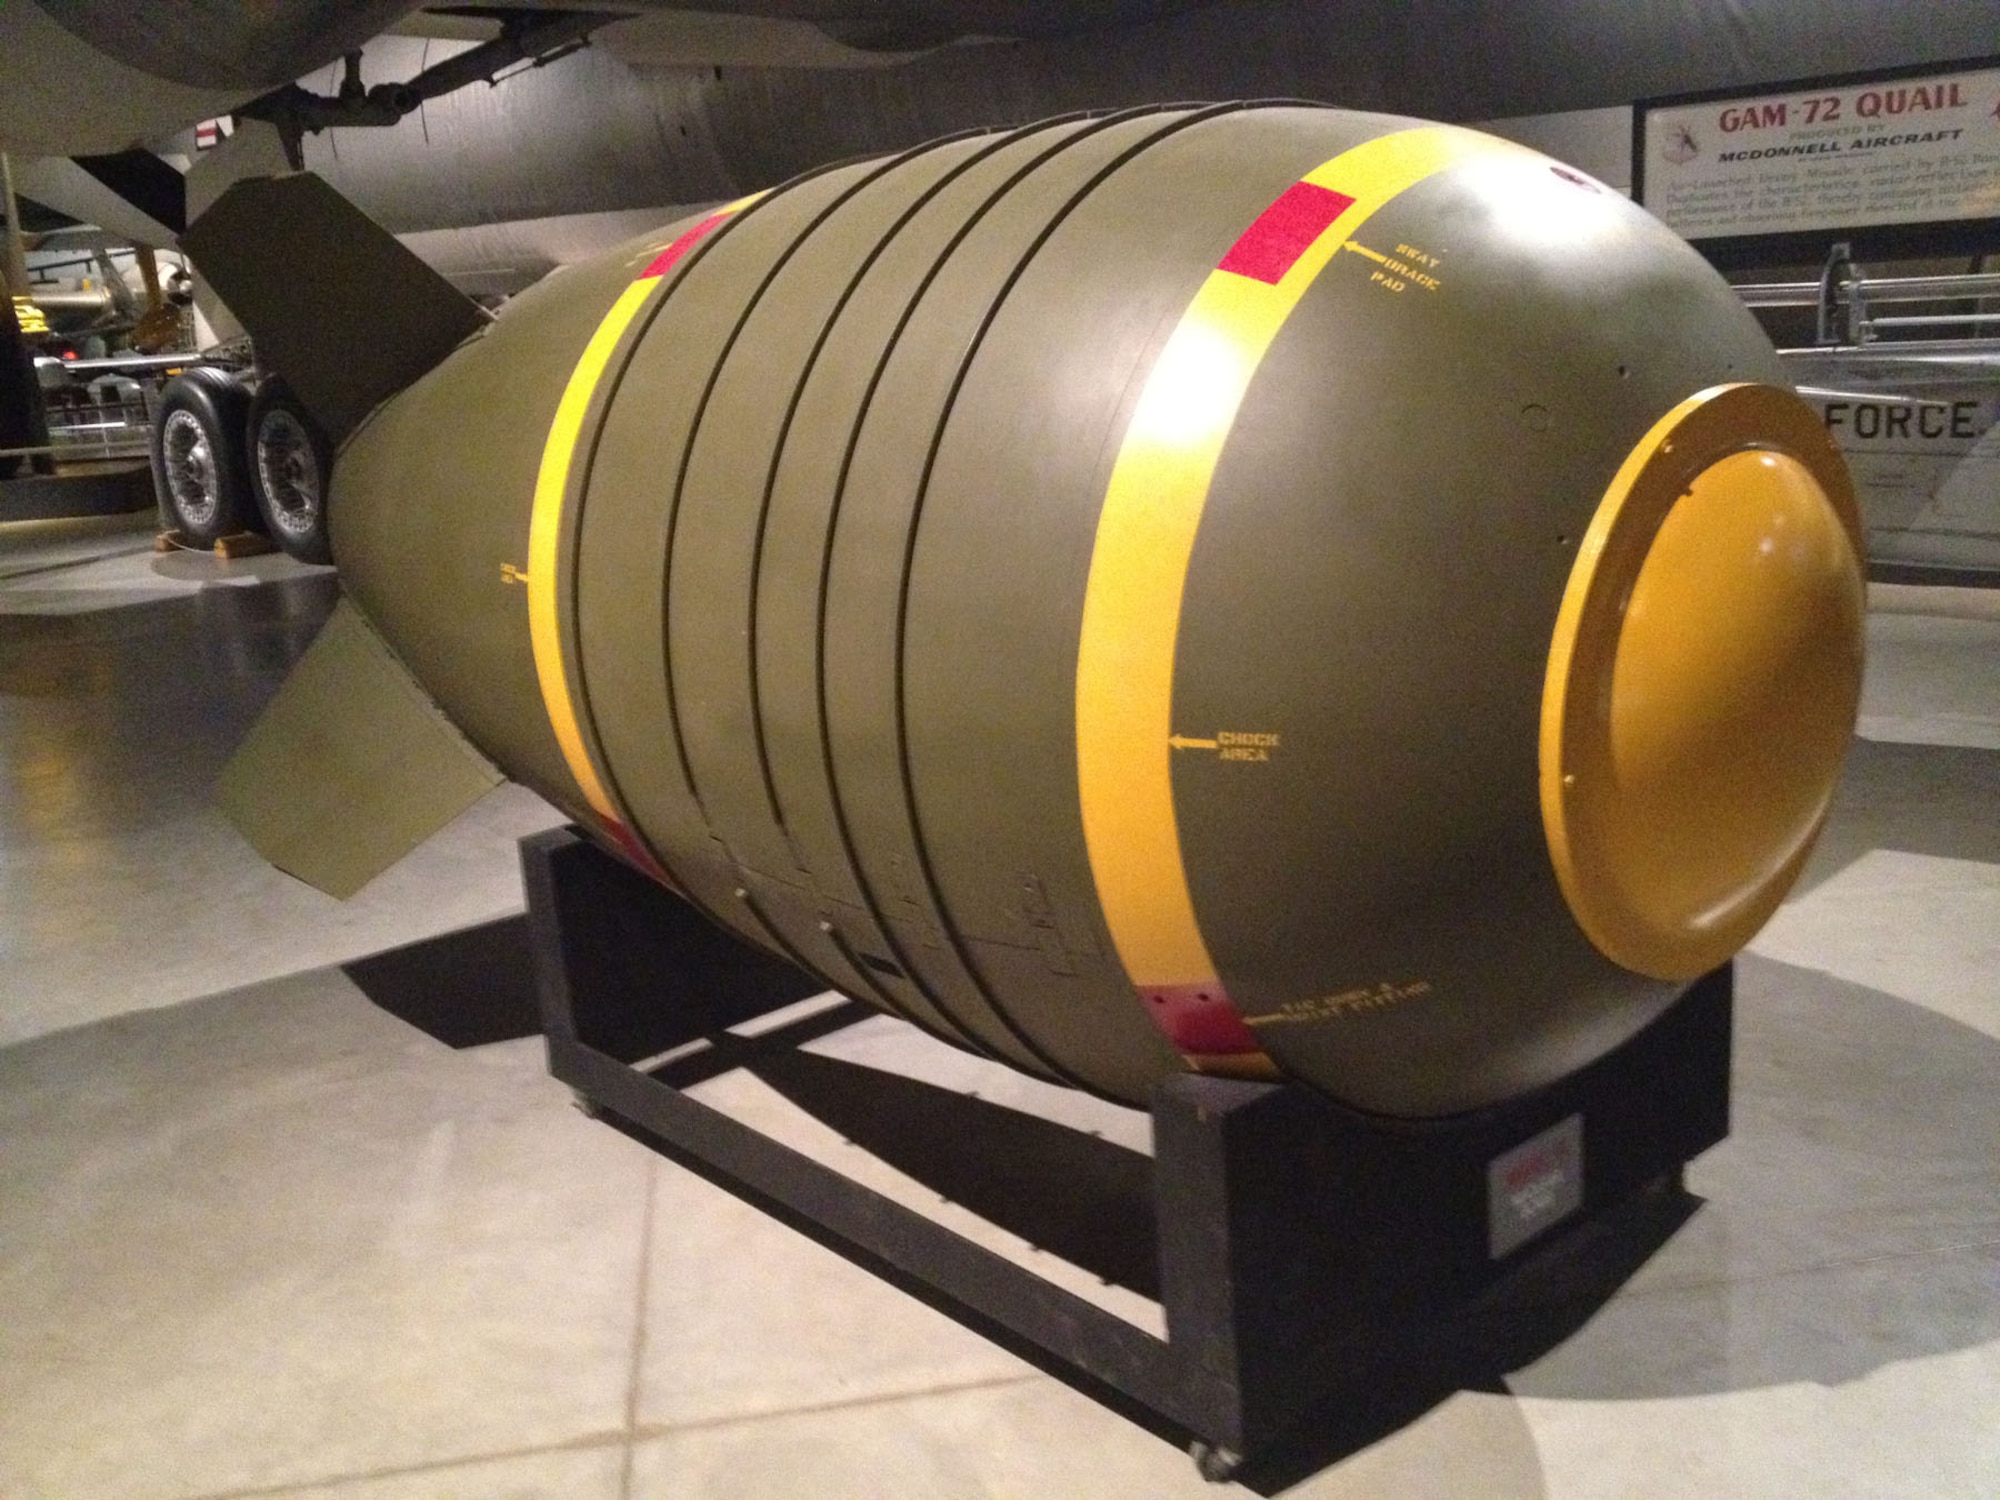 Mark VI Aerial Bomb on display at the National Museum of the U.S. Air Force. (U.S. Air Force photo)
